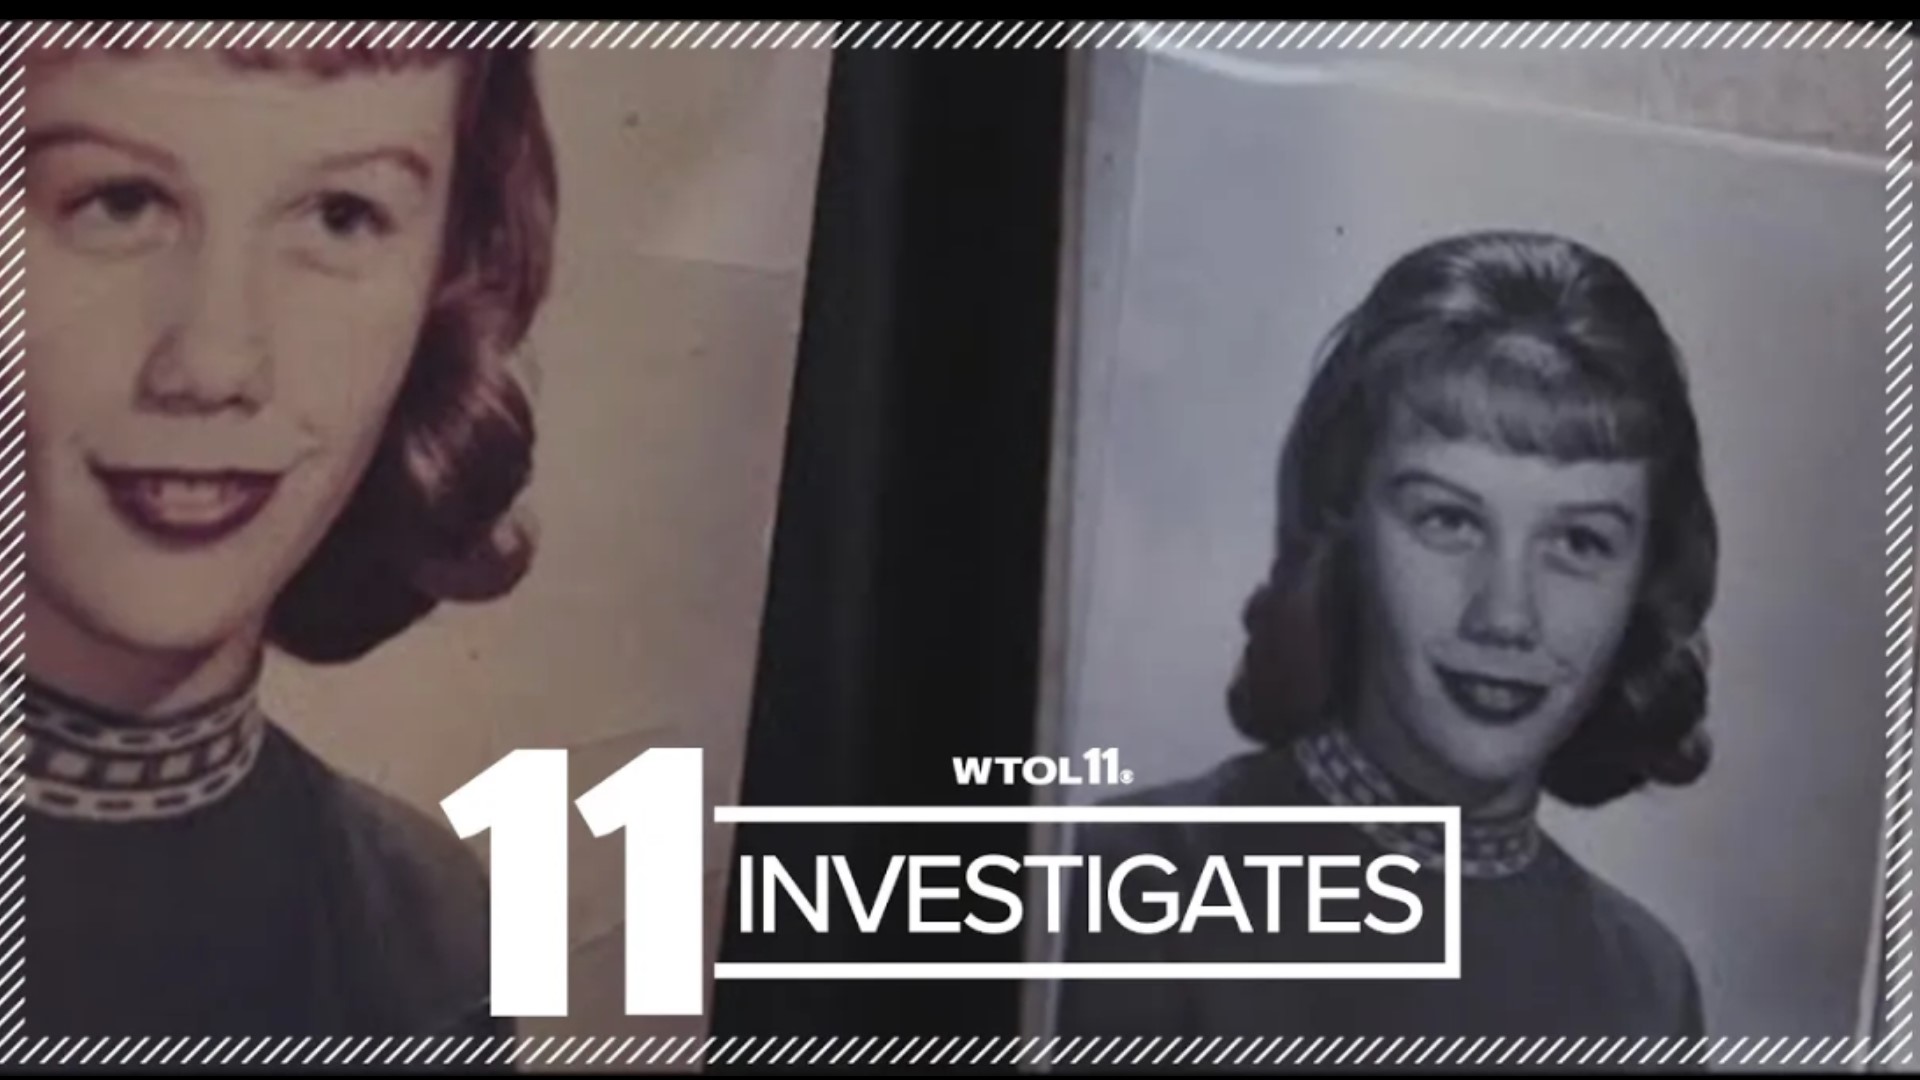 Tips pour in during 1960 murder investigation, but loss of evidence stymies progress.